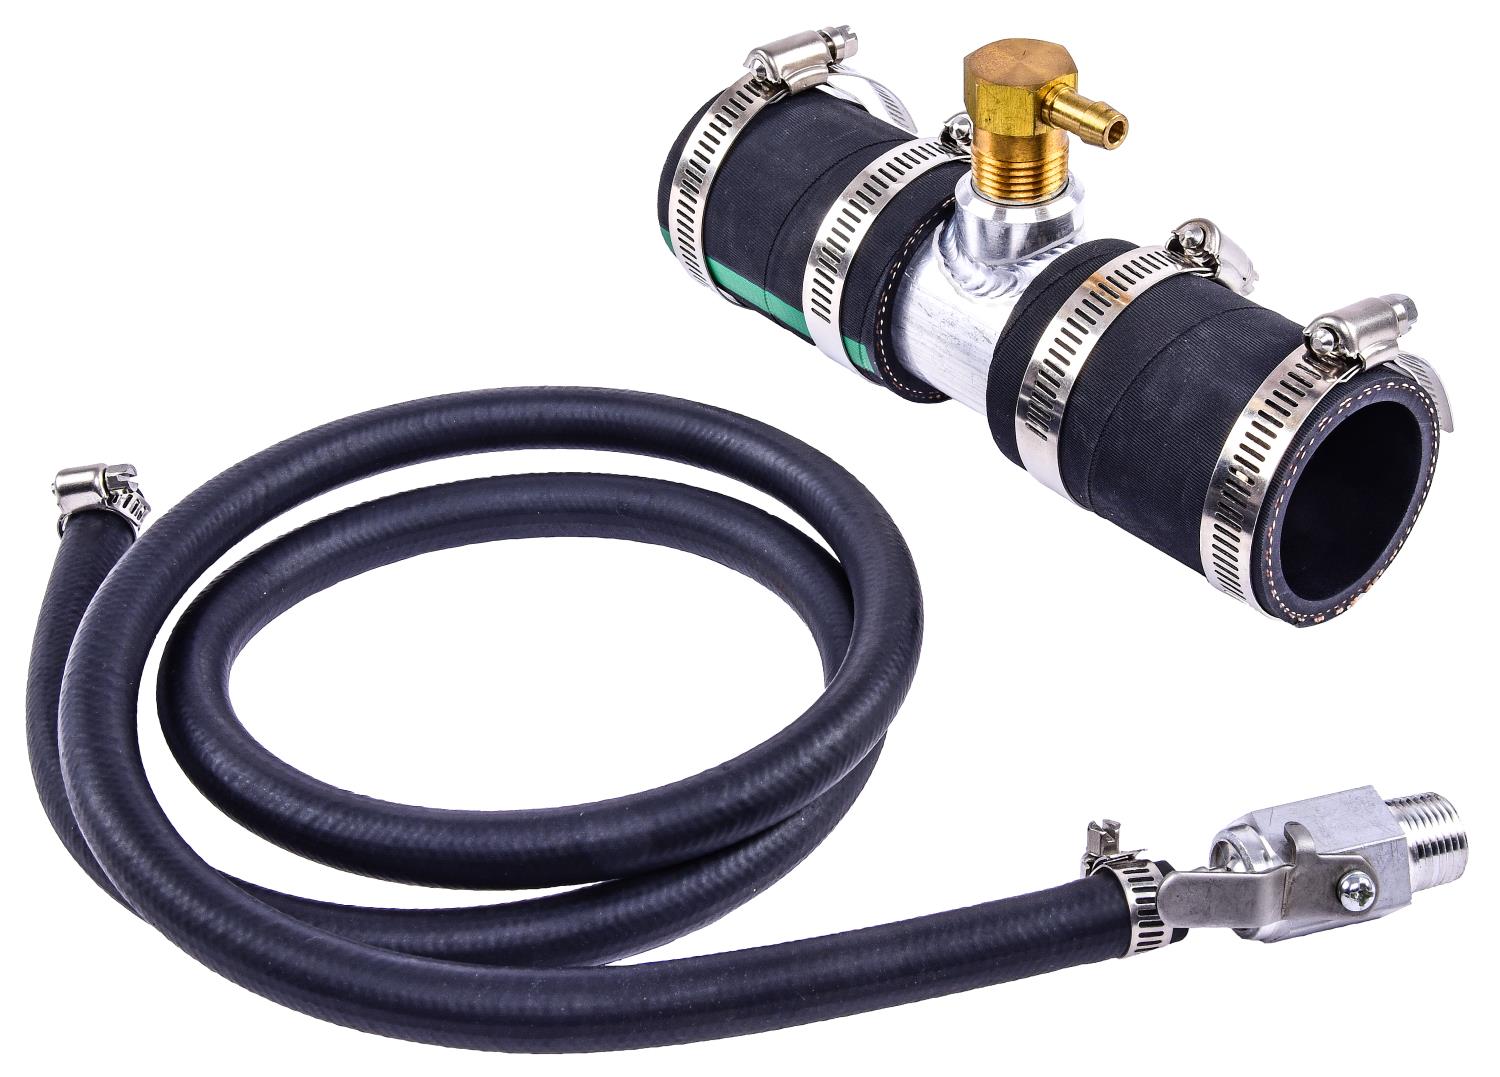 Diesel Auxiliary Tank Install Kit [1.750 in. Fill Line]